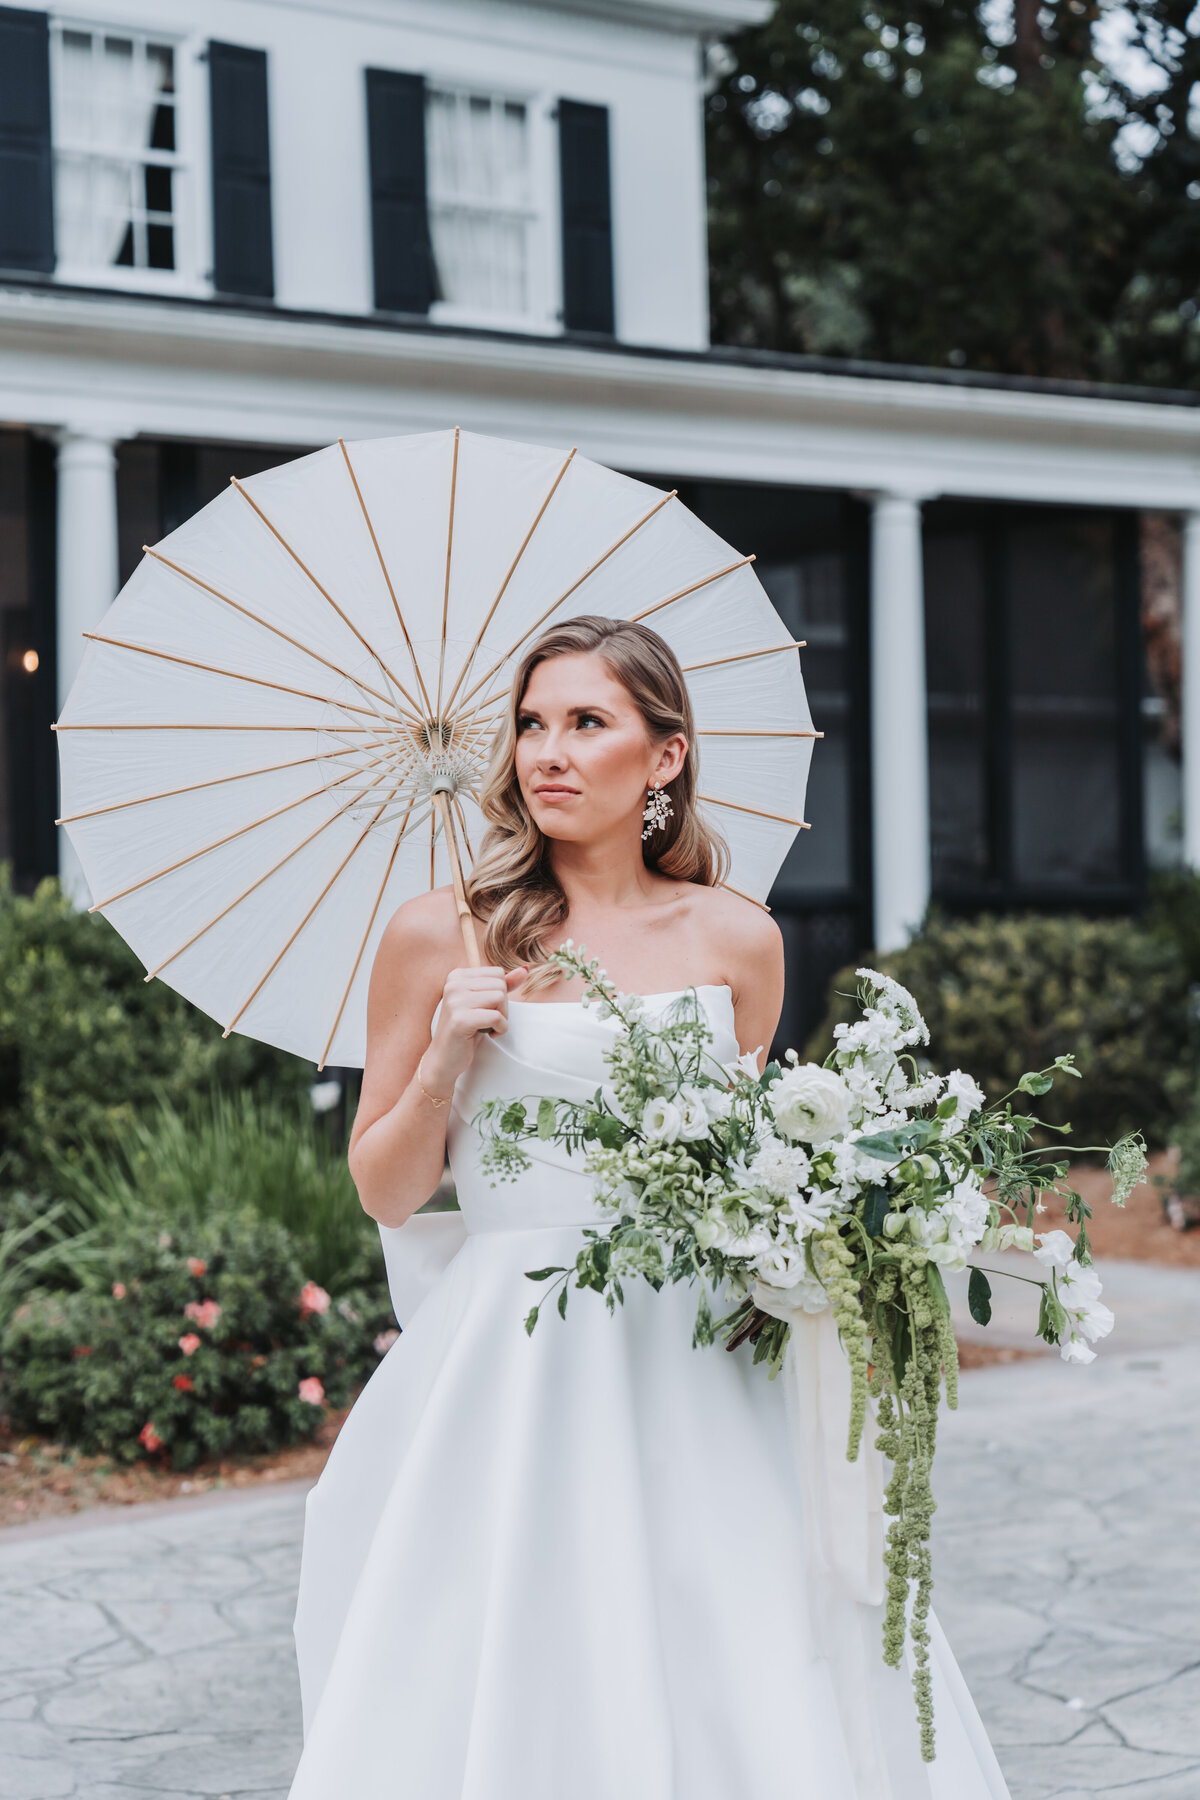 Bride holds bouquet and umbrella in hand